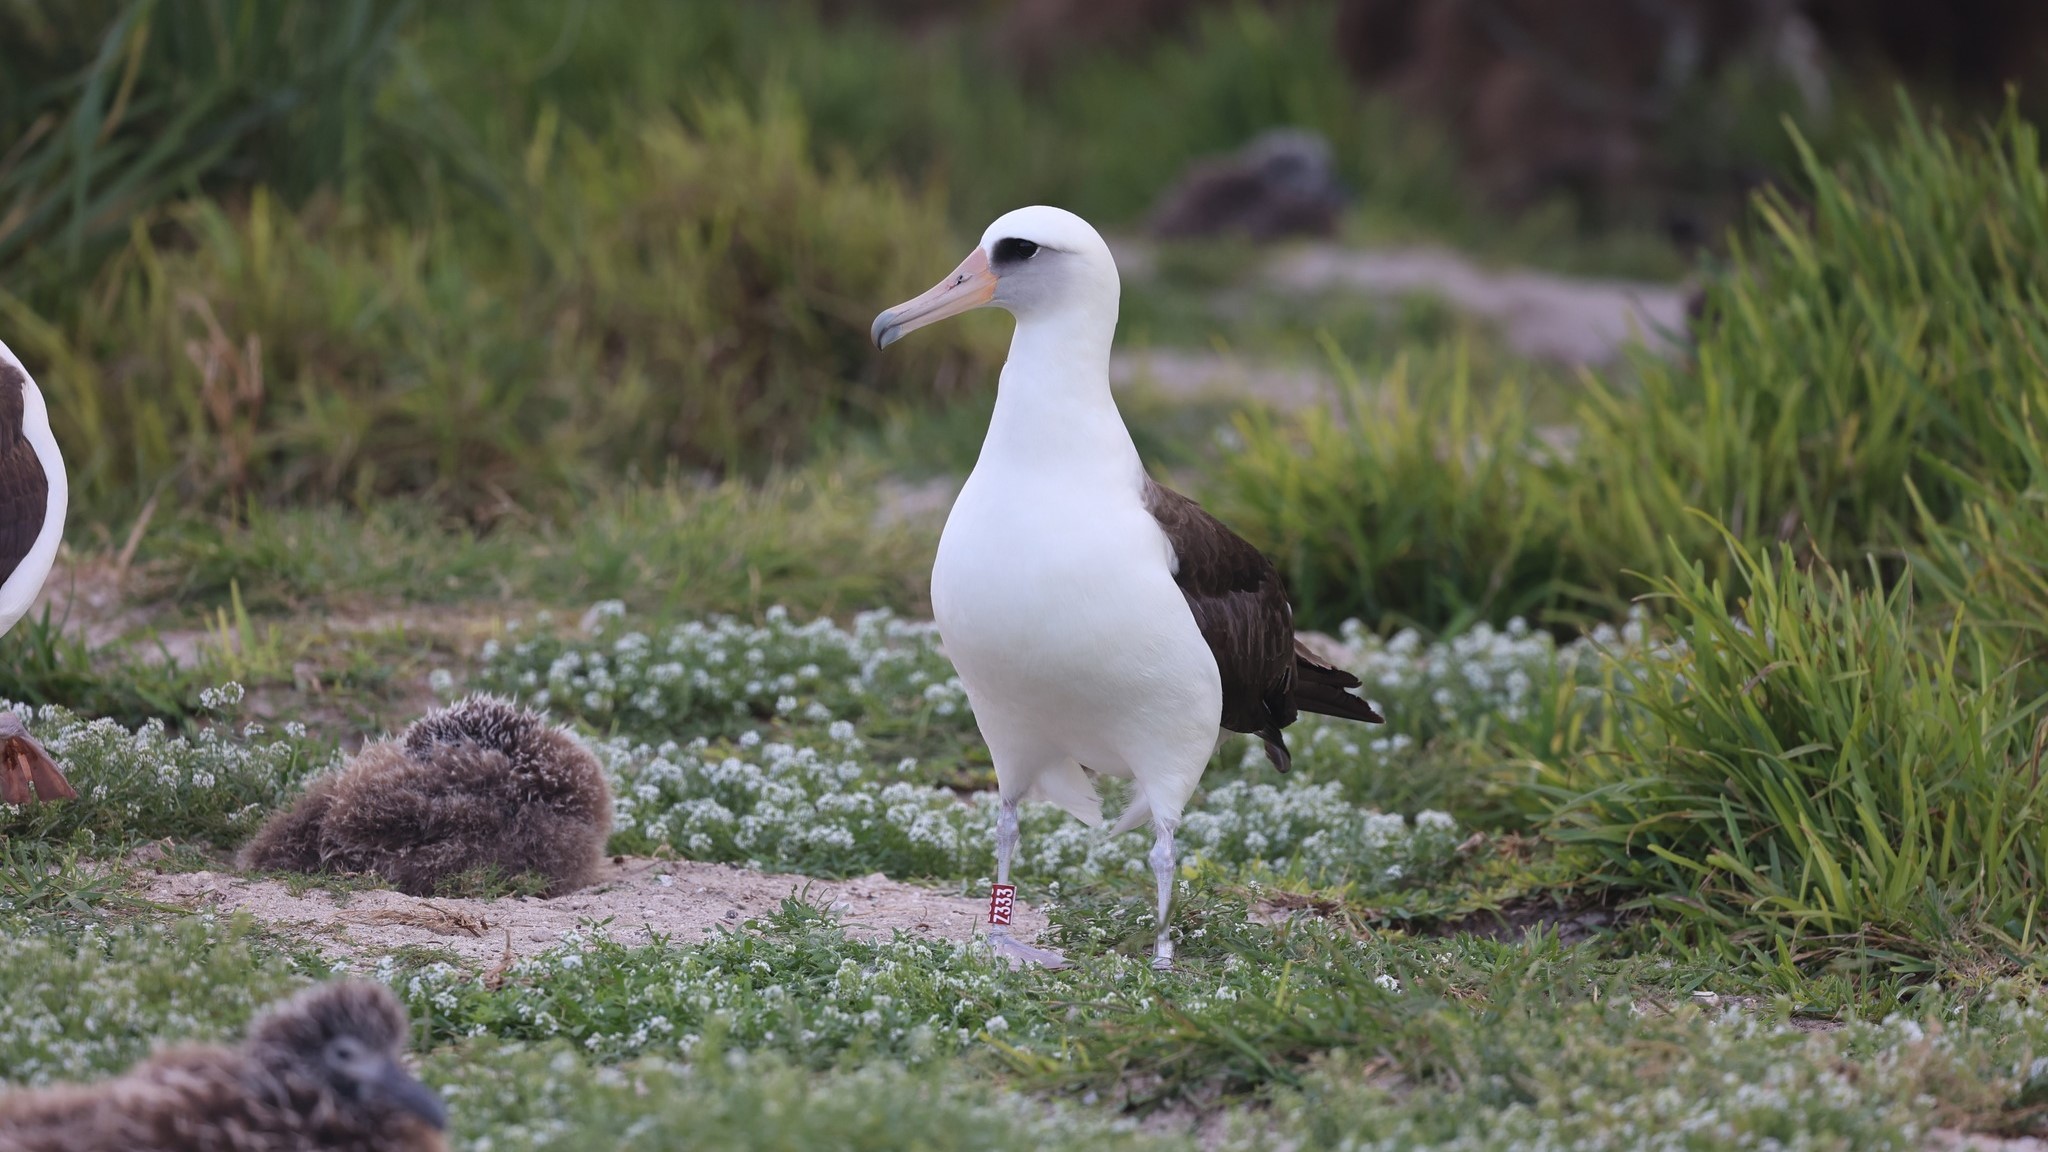 A female albatross in her 70s spotted at Midway Atoll National Wildlife Refuge.